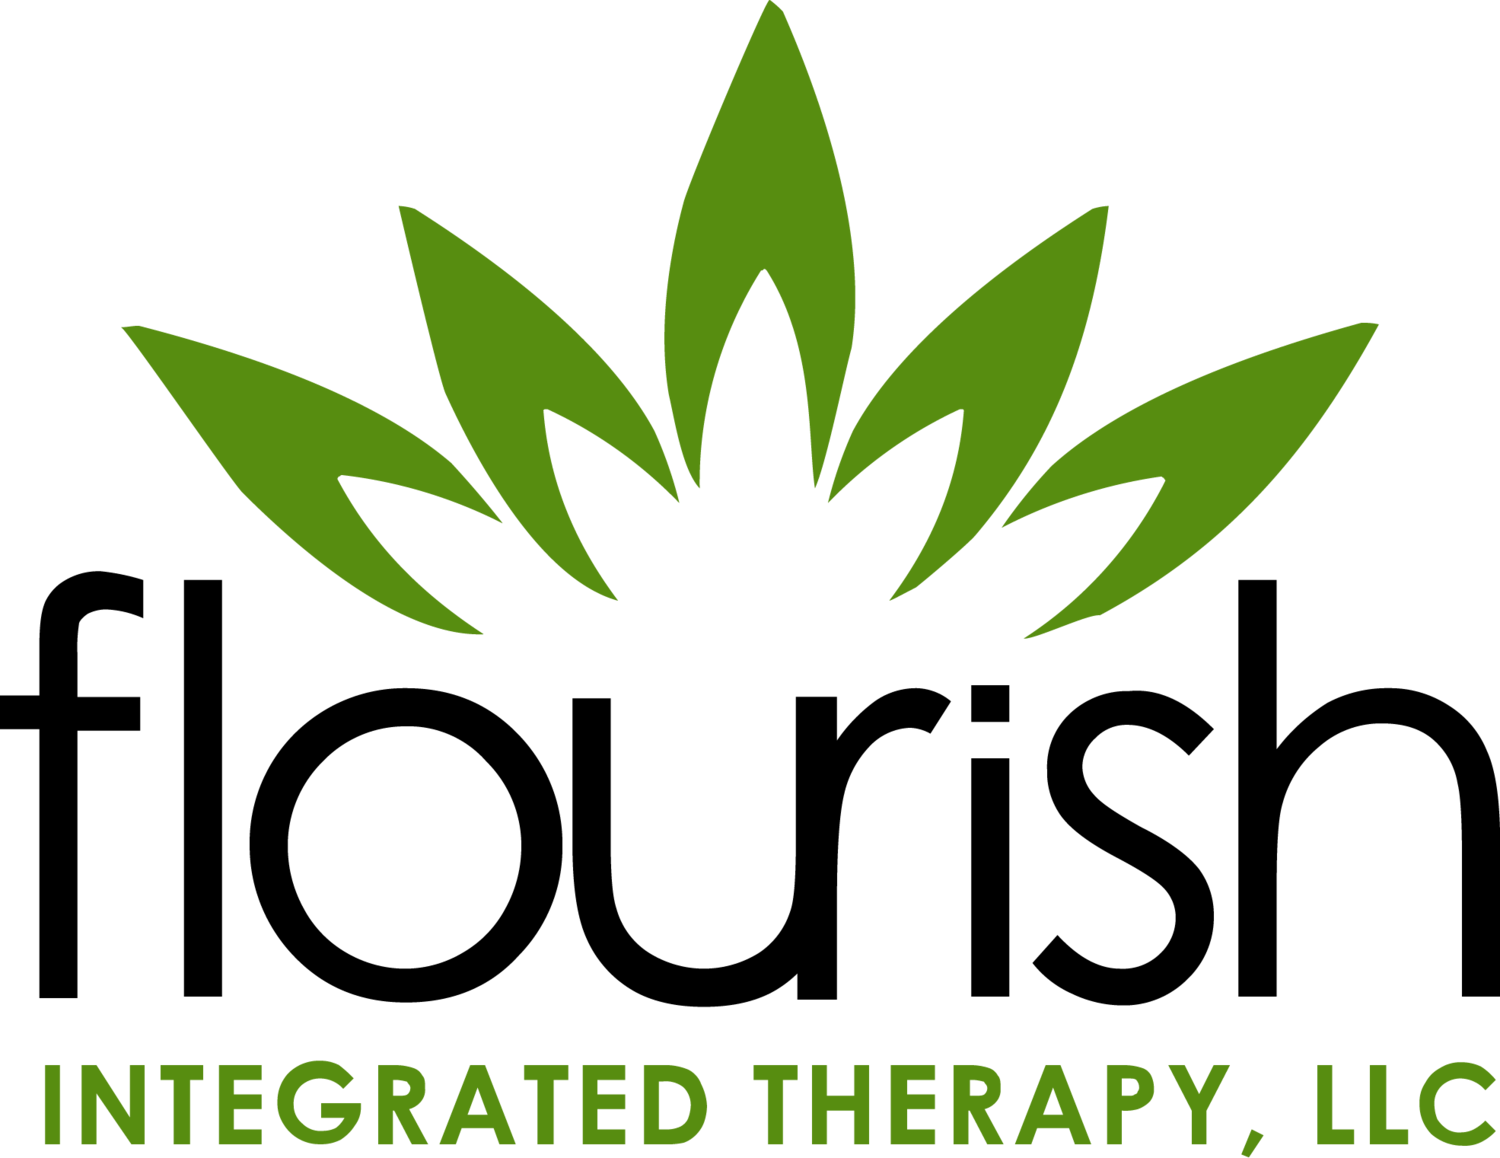 Flourish Integrated Therapy